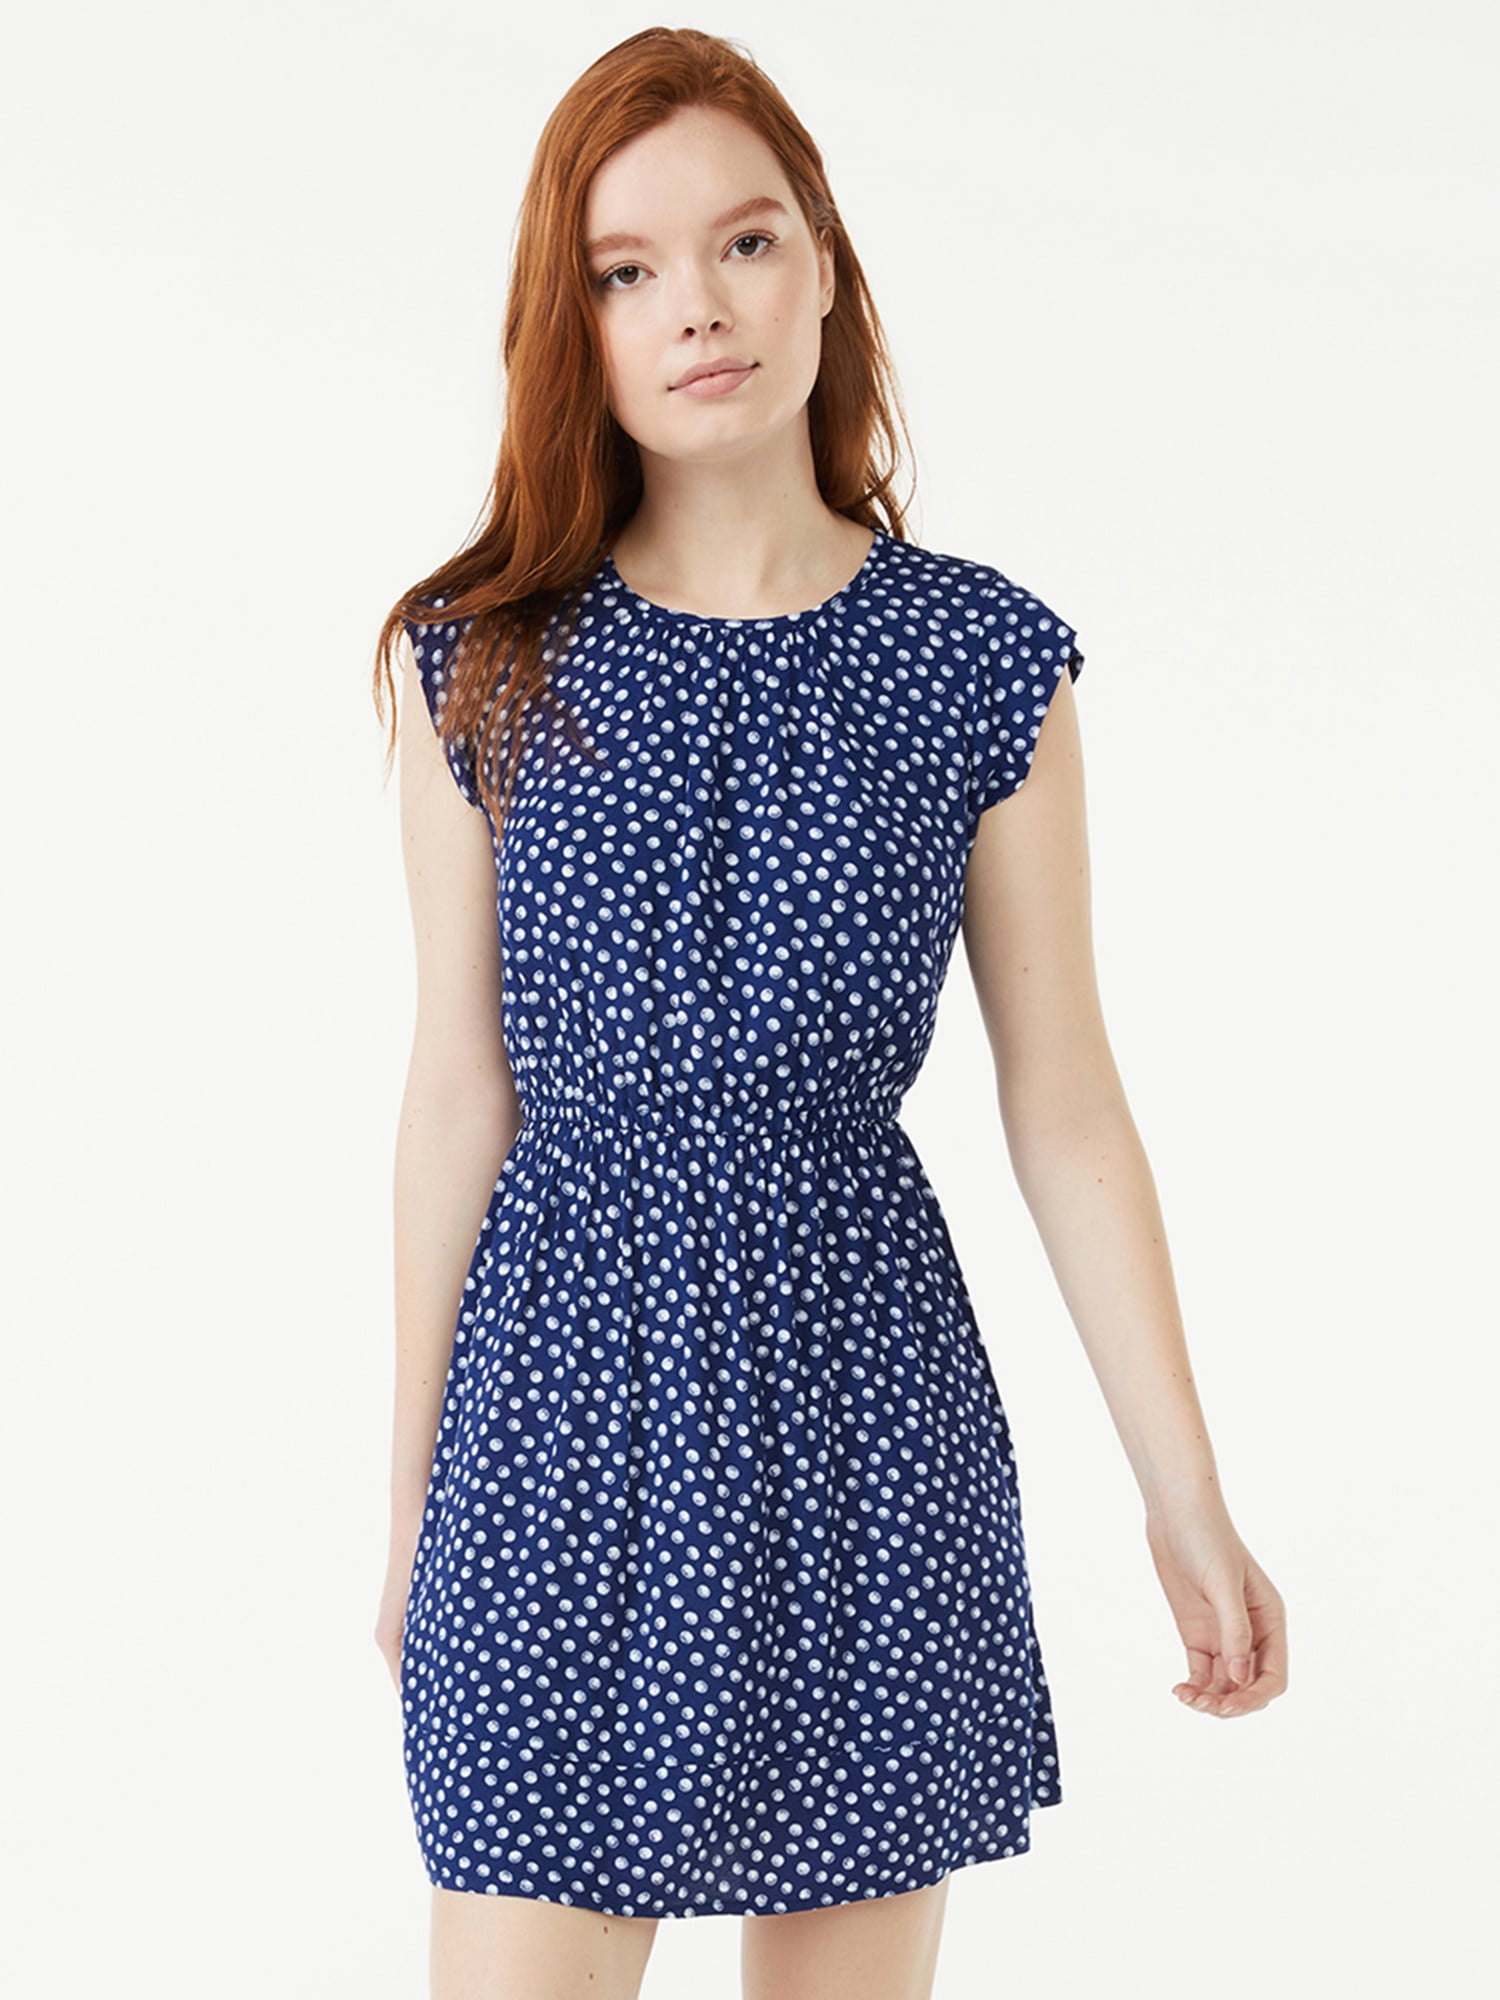 Textured crepe navy blue dress with white stitching